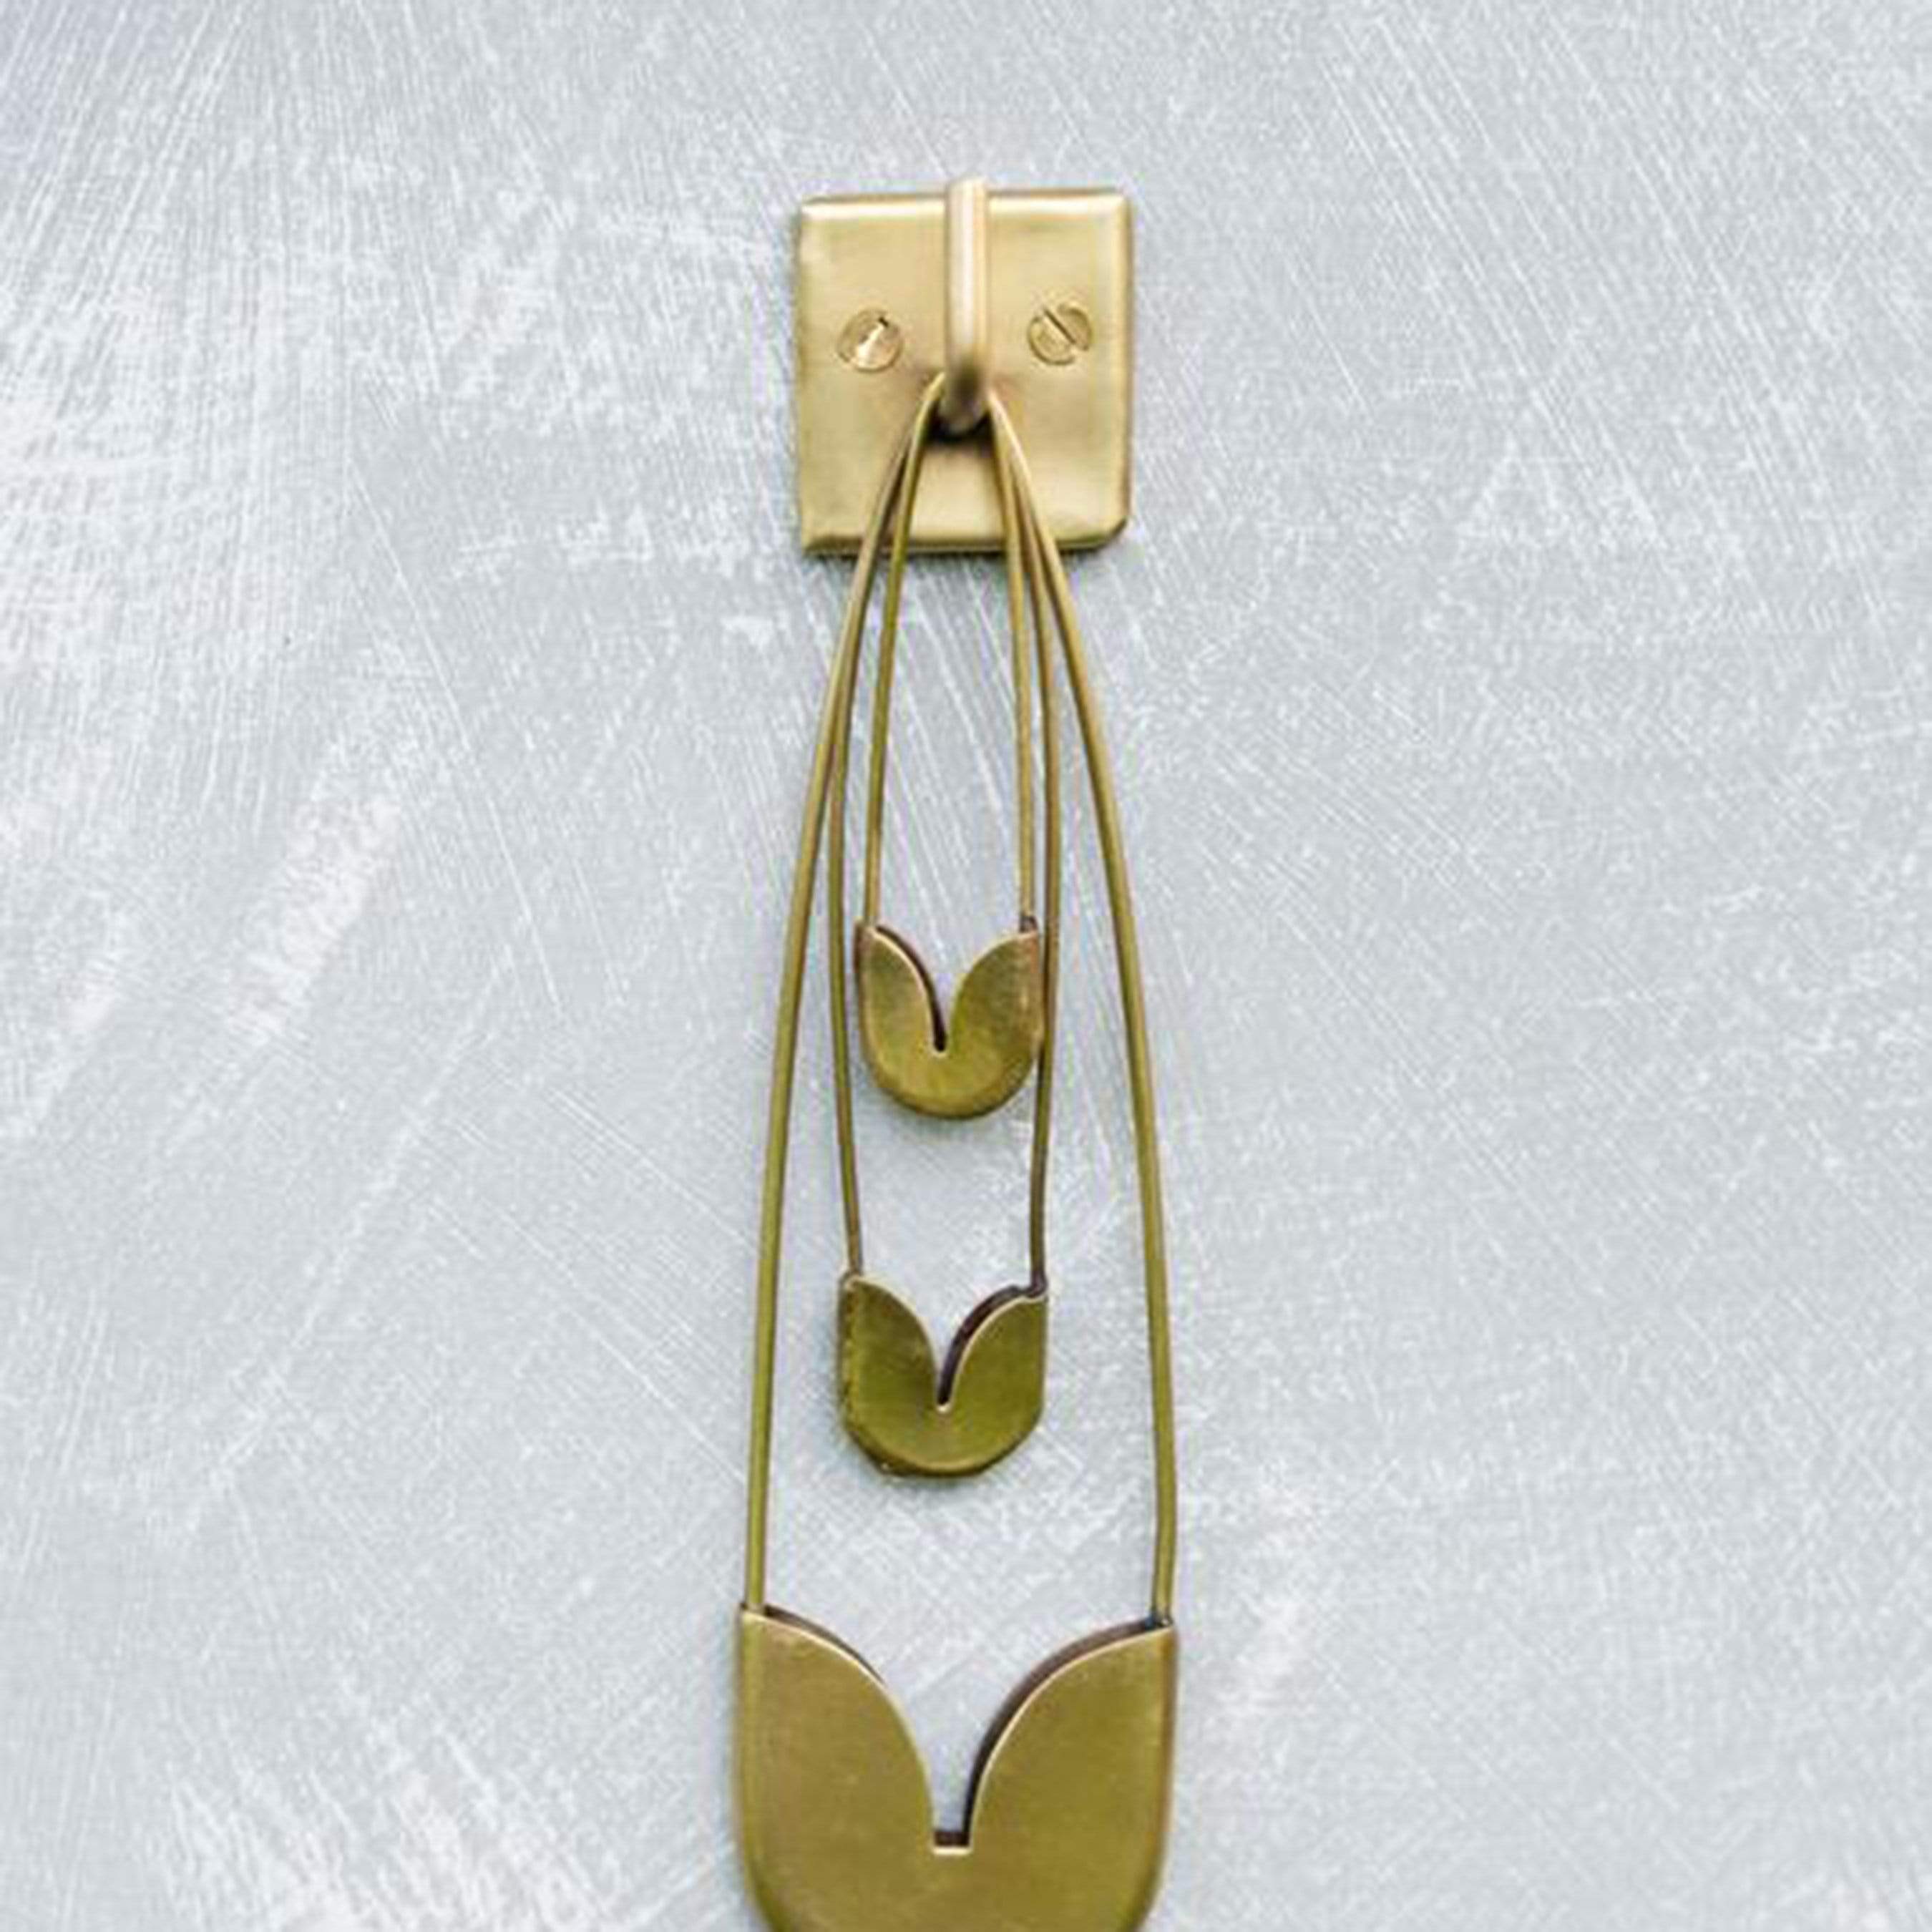 1 BRASS PLATED S-HOOK - Tellico Plains, TN - Yates Home Pro